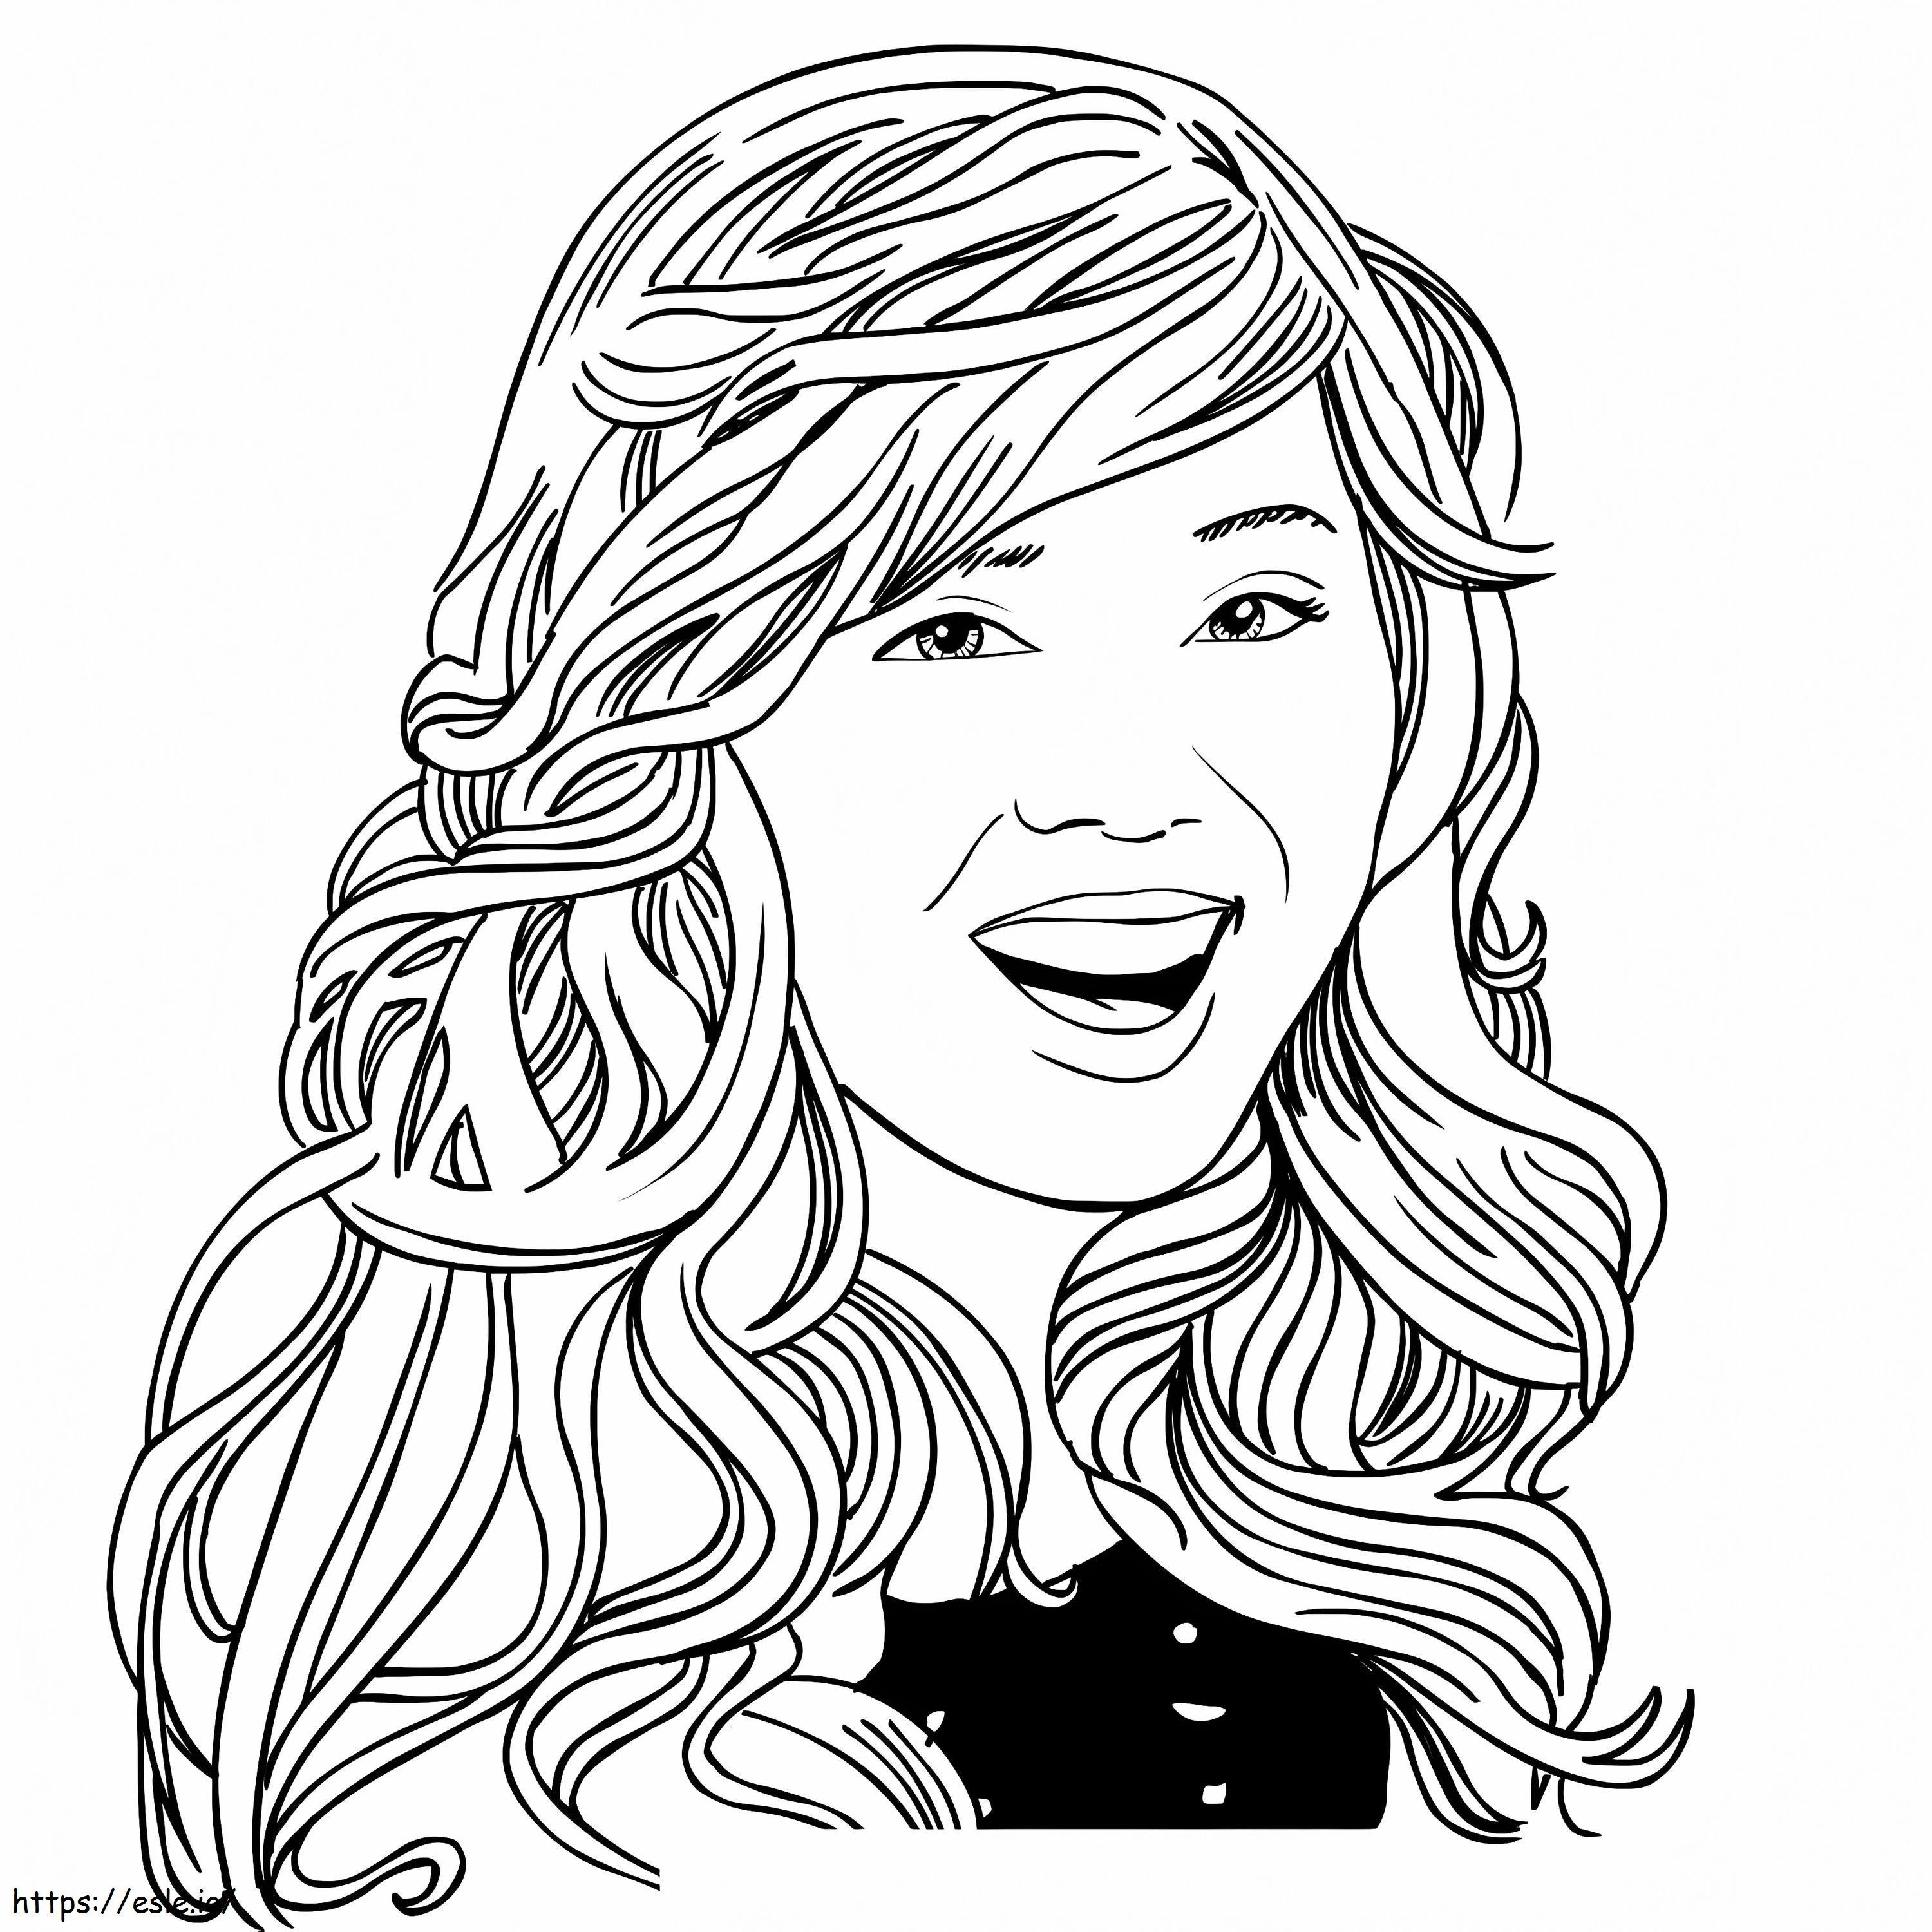 Sam Pucket From ICarly coloring page